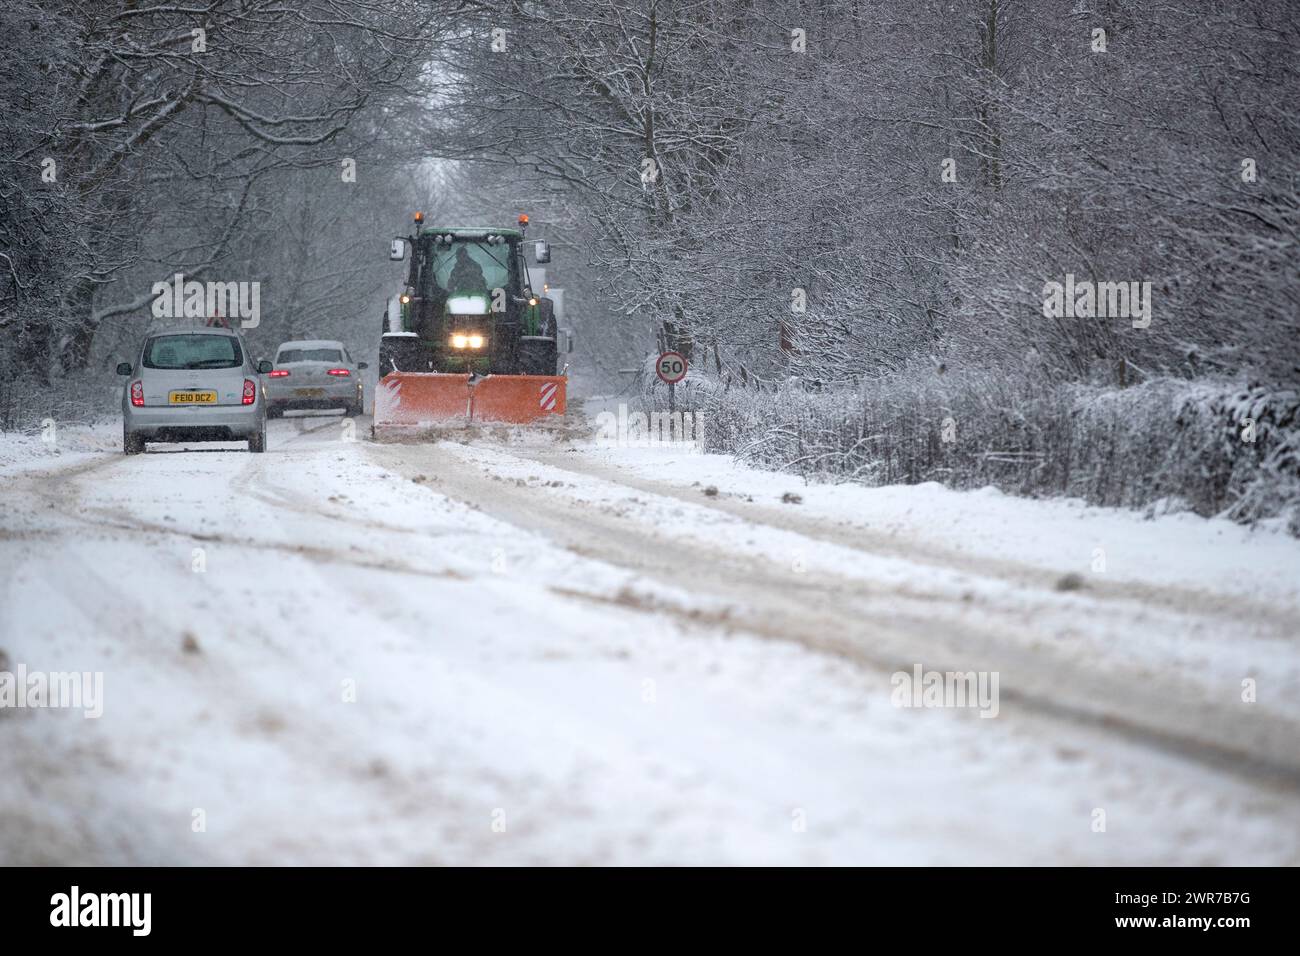 29/12/17  A tractor with a snow plough clears the A515 near Biggin, Derbyshire. Stock Photo